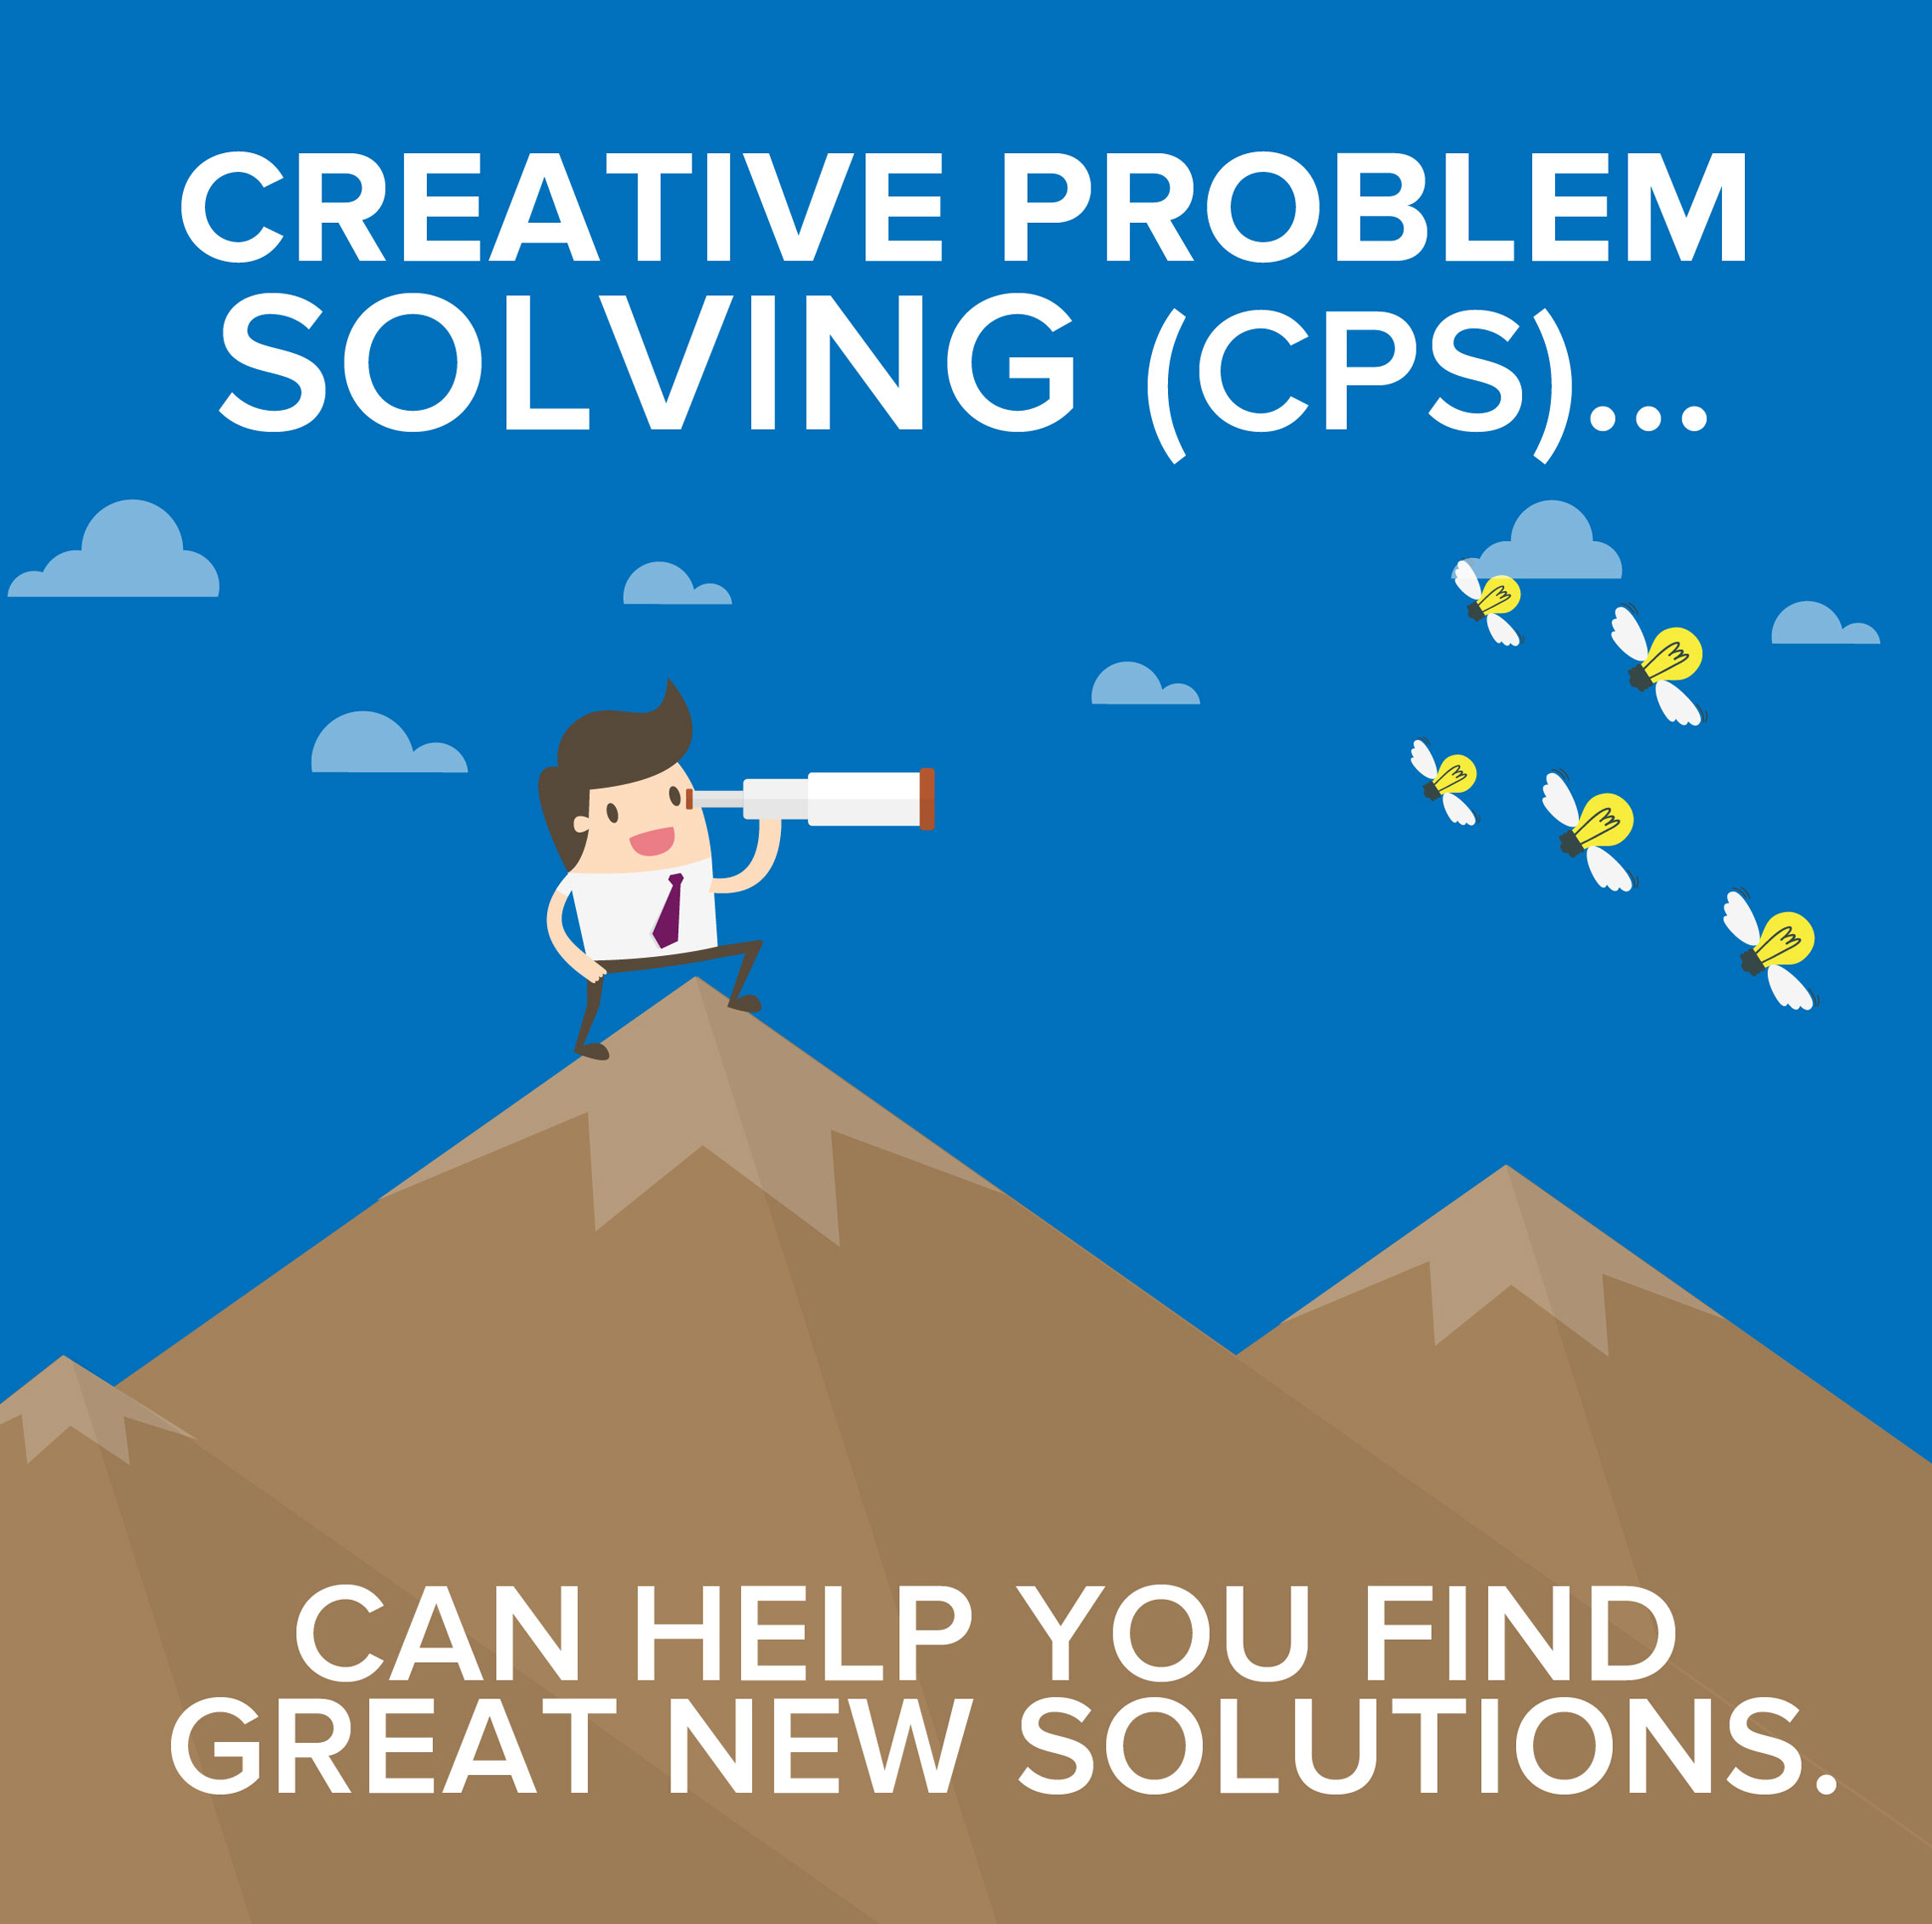 creative and innovative approach to problem solving